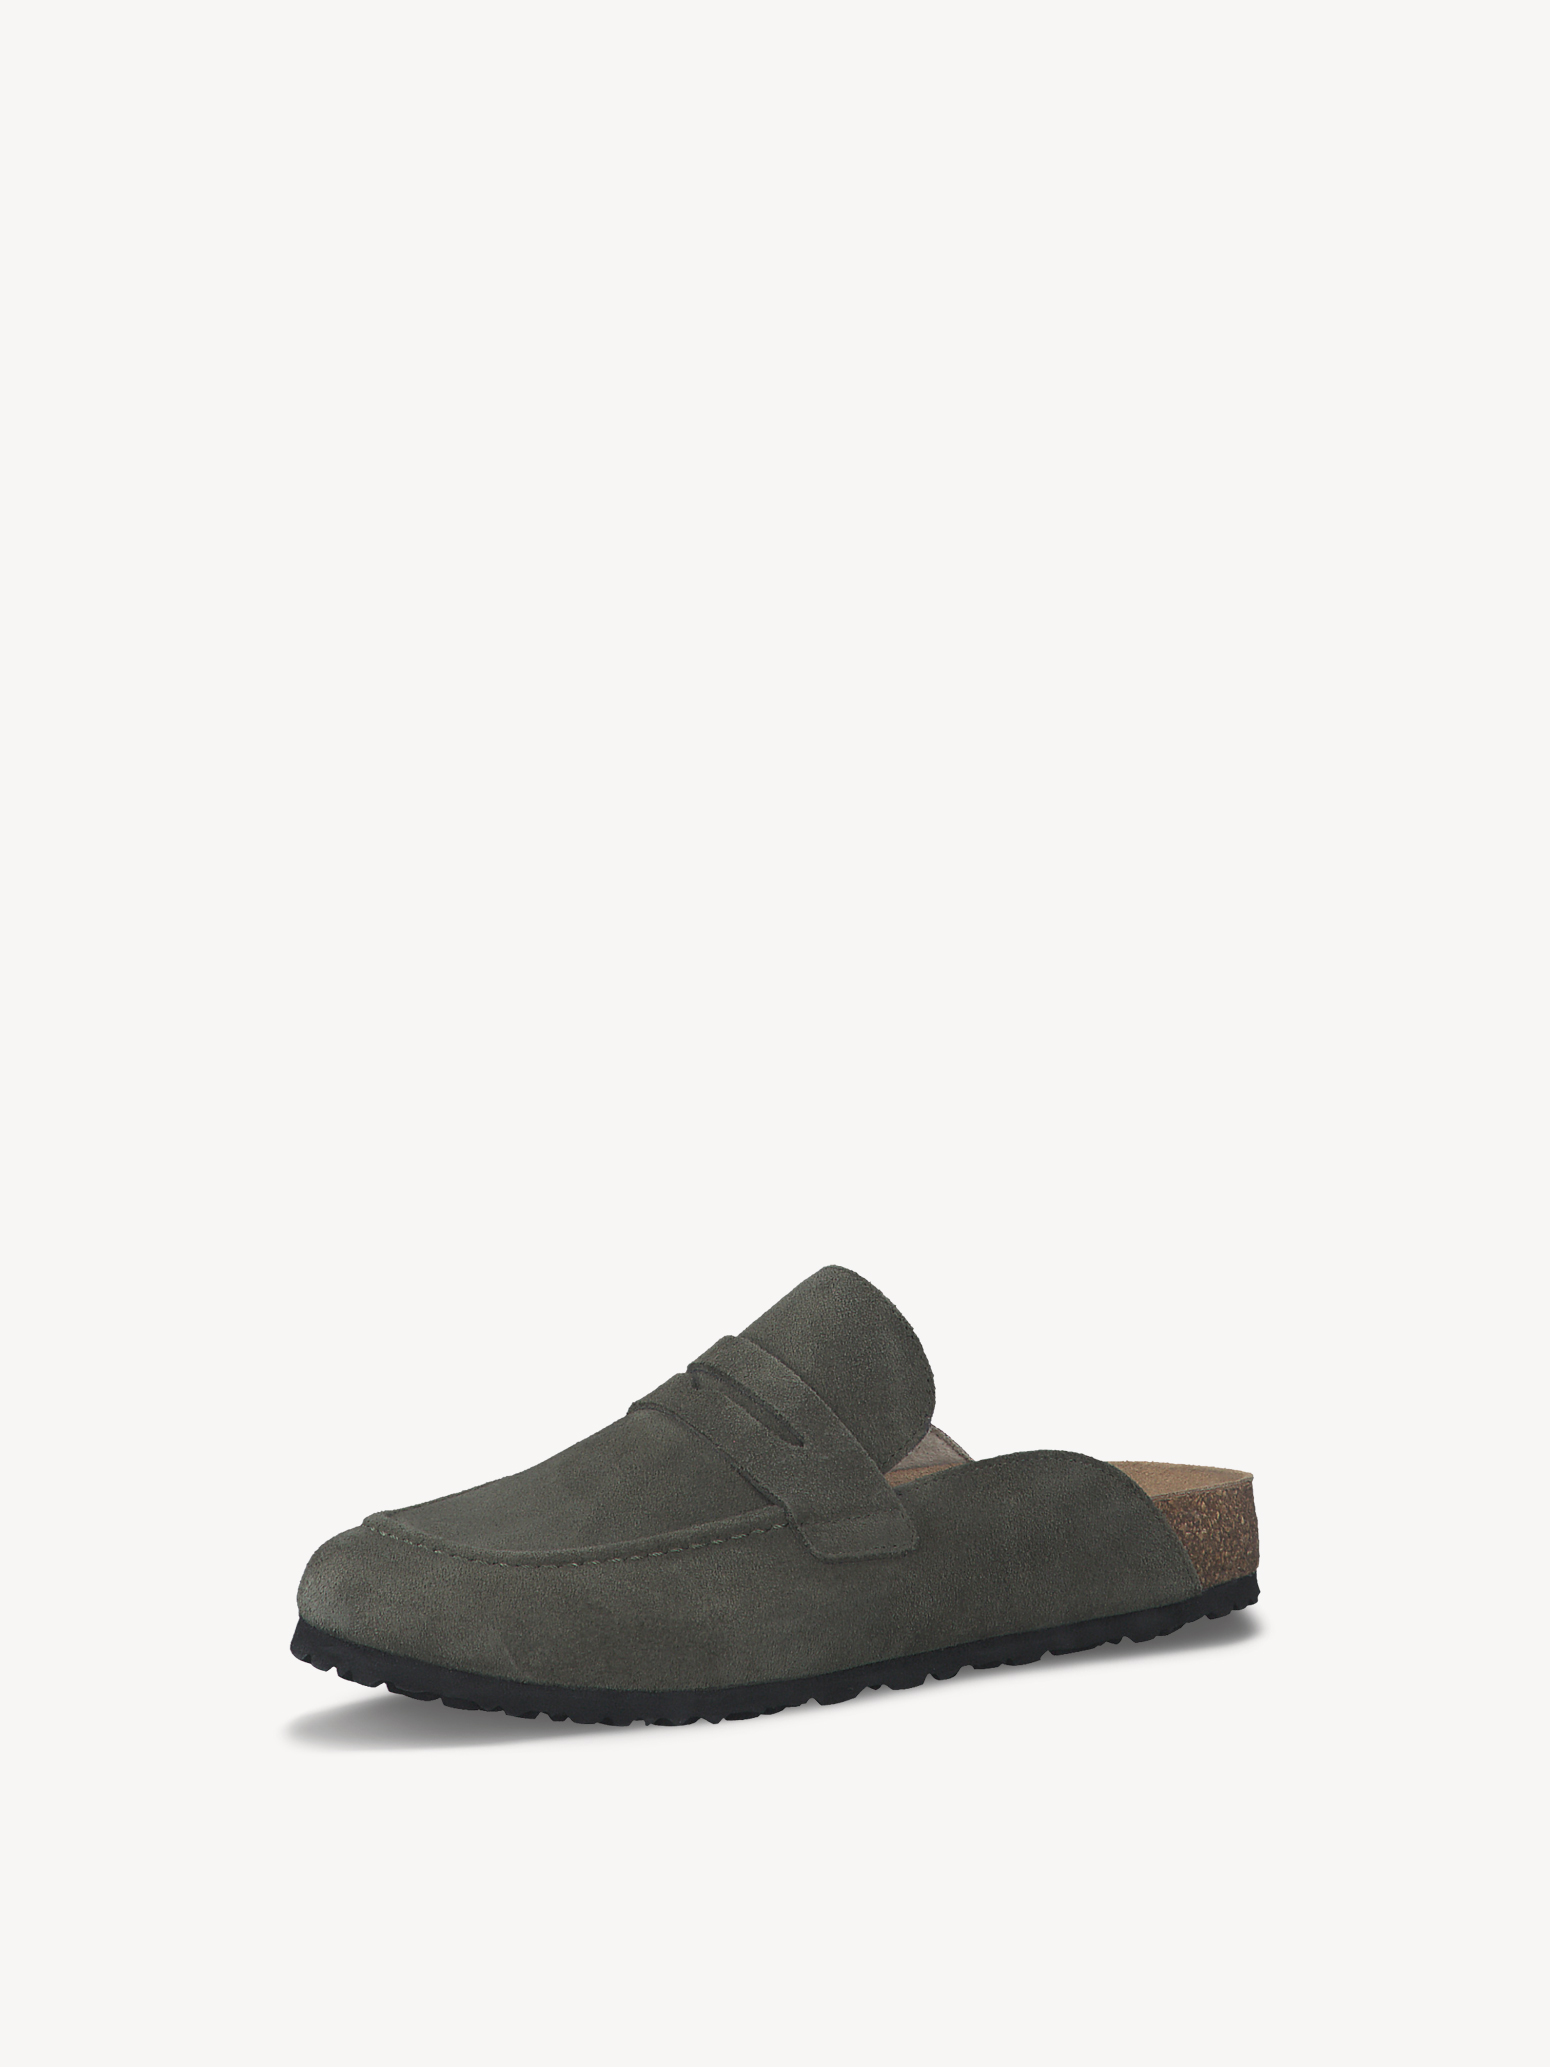 Leather Mule - green, OLIVE, hi-res